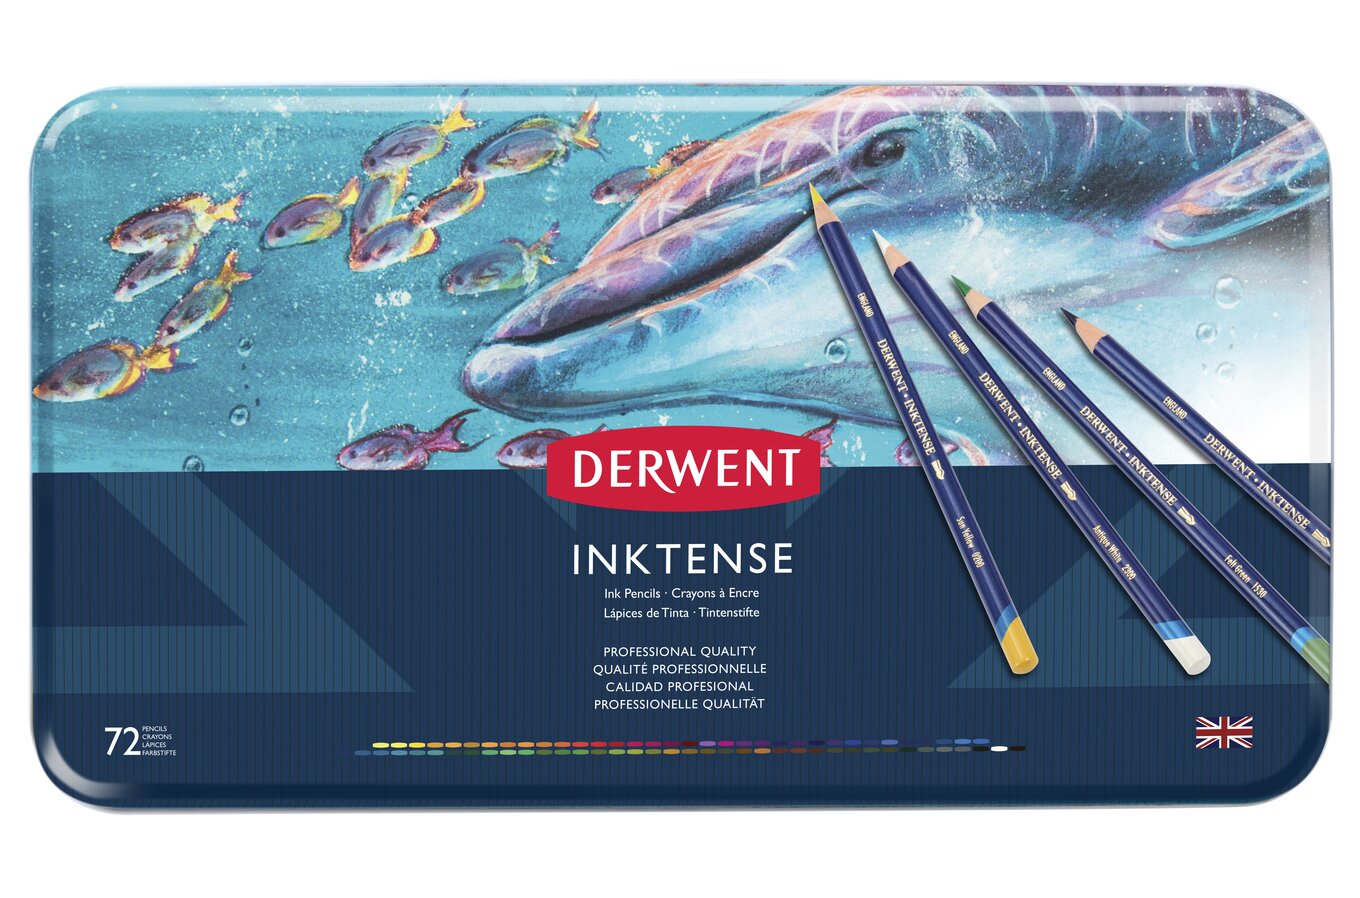 Carry the brilliance of Inktense in your pocket with Derwent